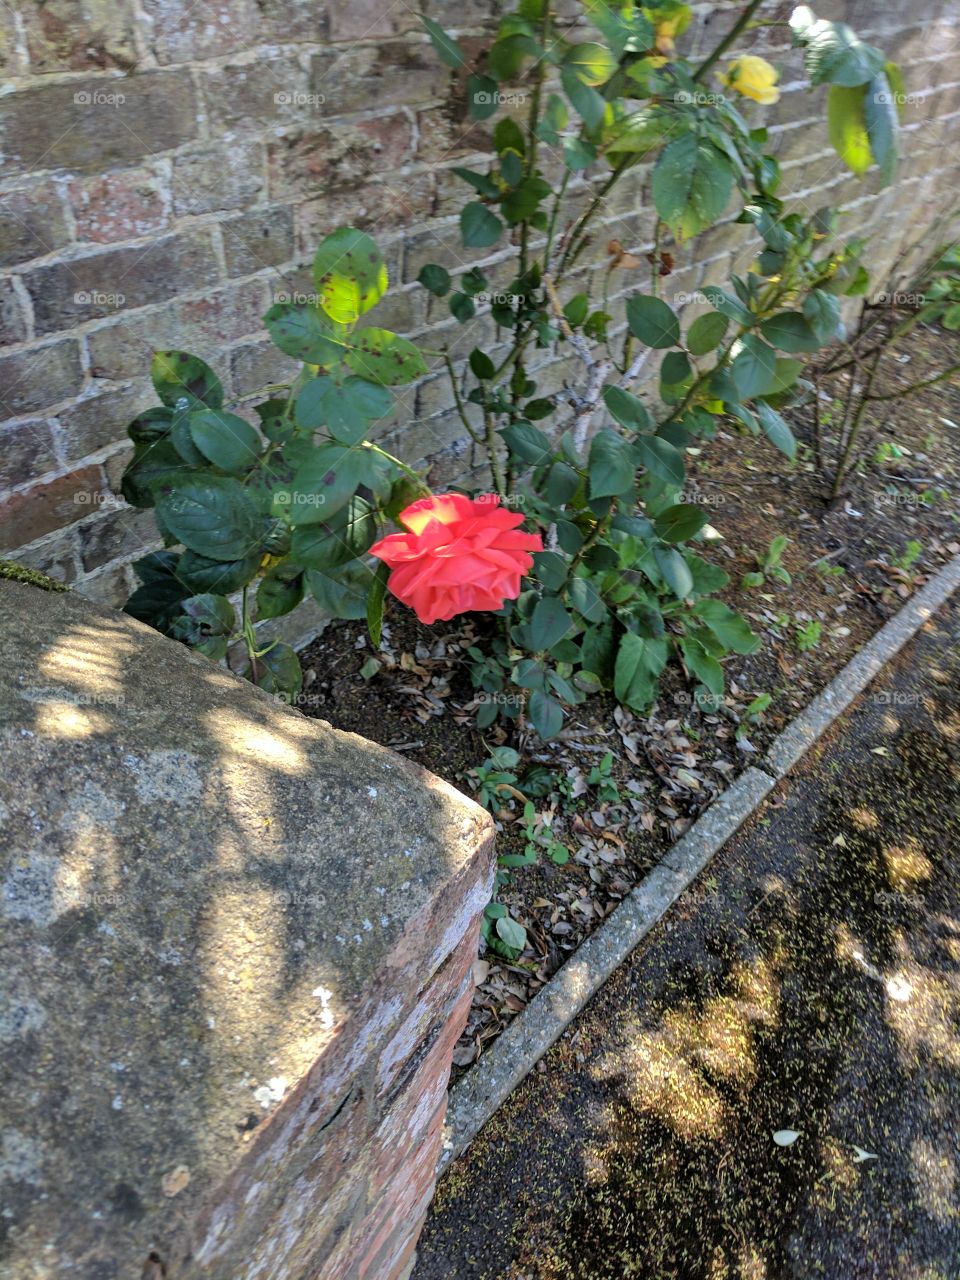 the lonely rose.